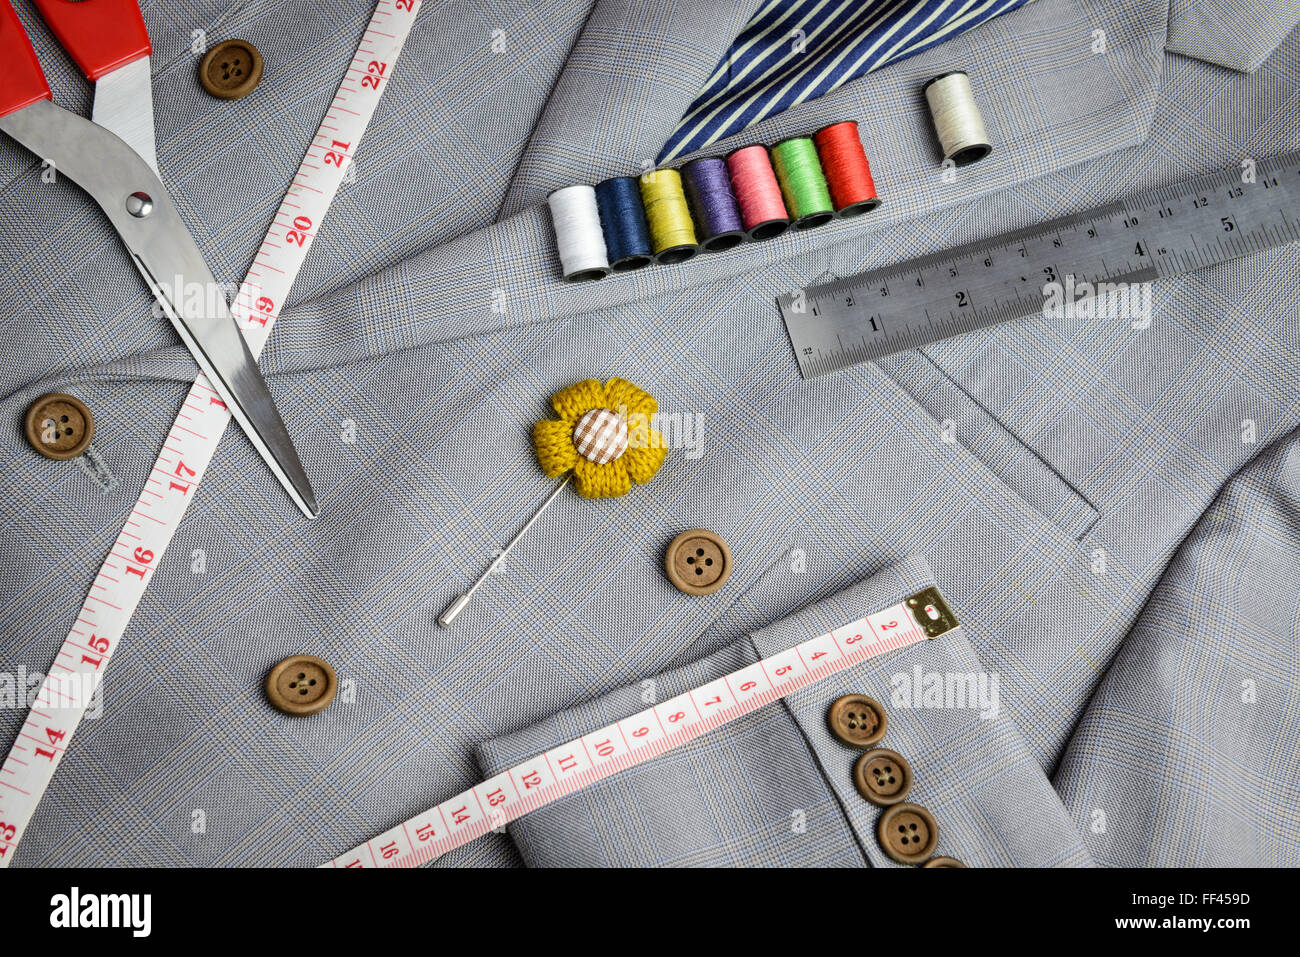 cutting, tailored equipments on double breasted suit, measurement tape, scissors, thread coil Stock Photo